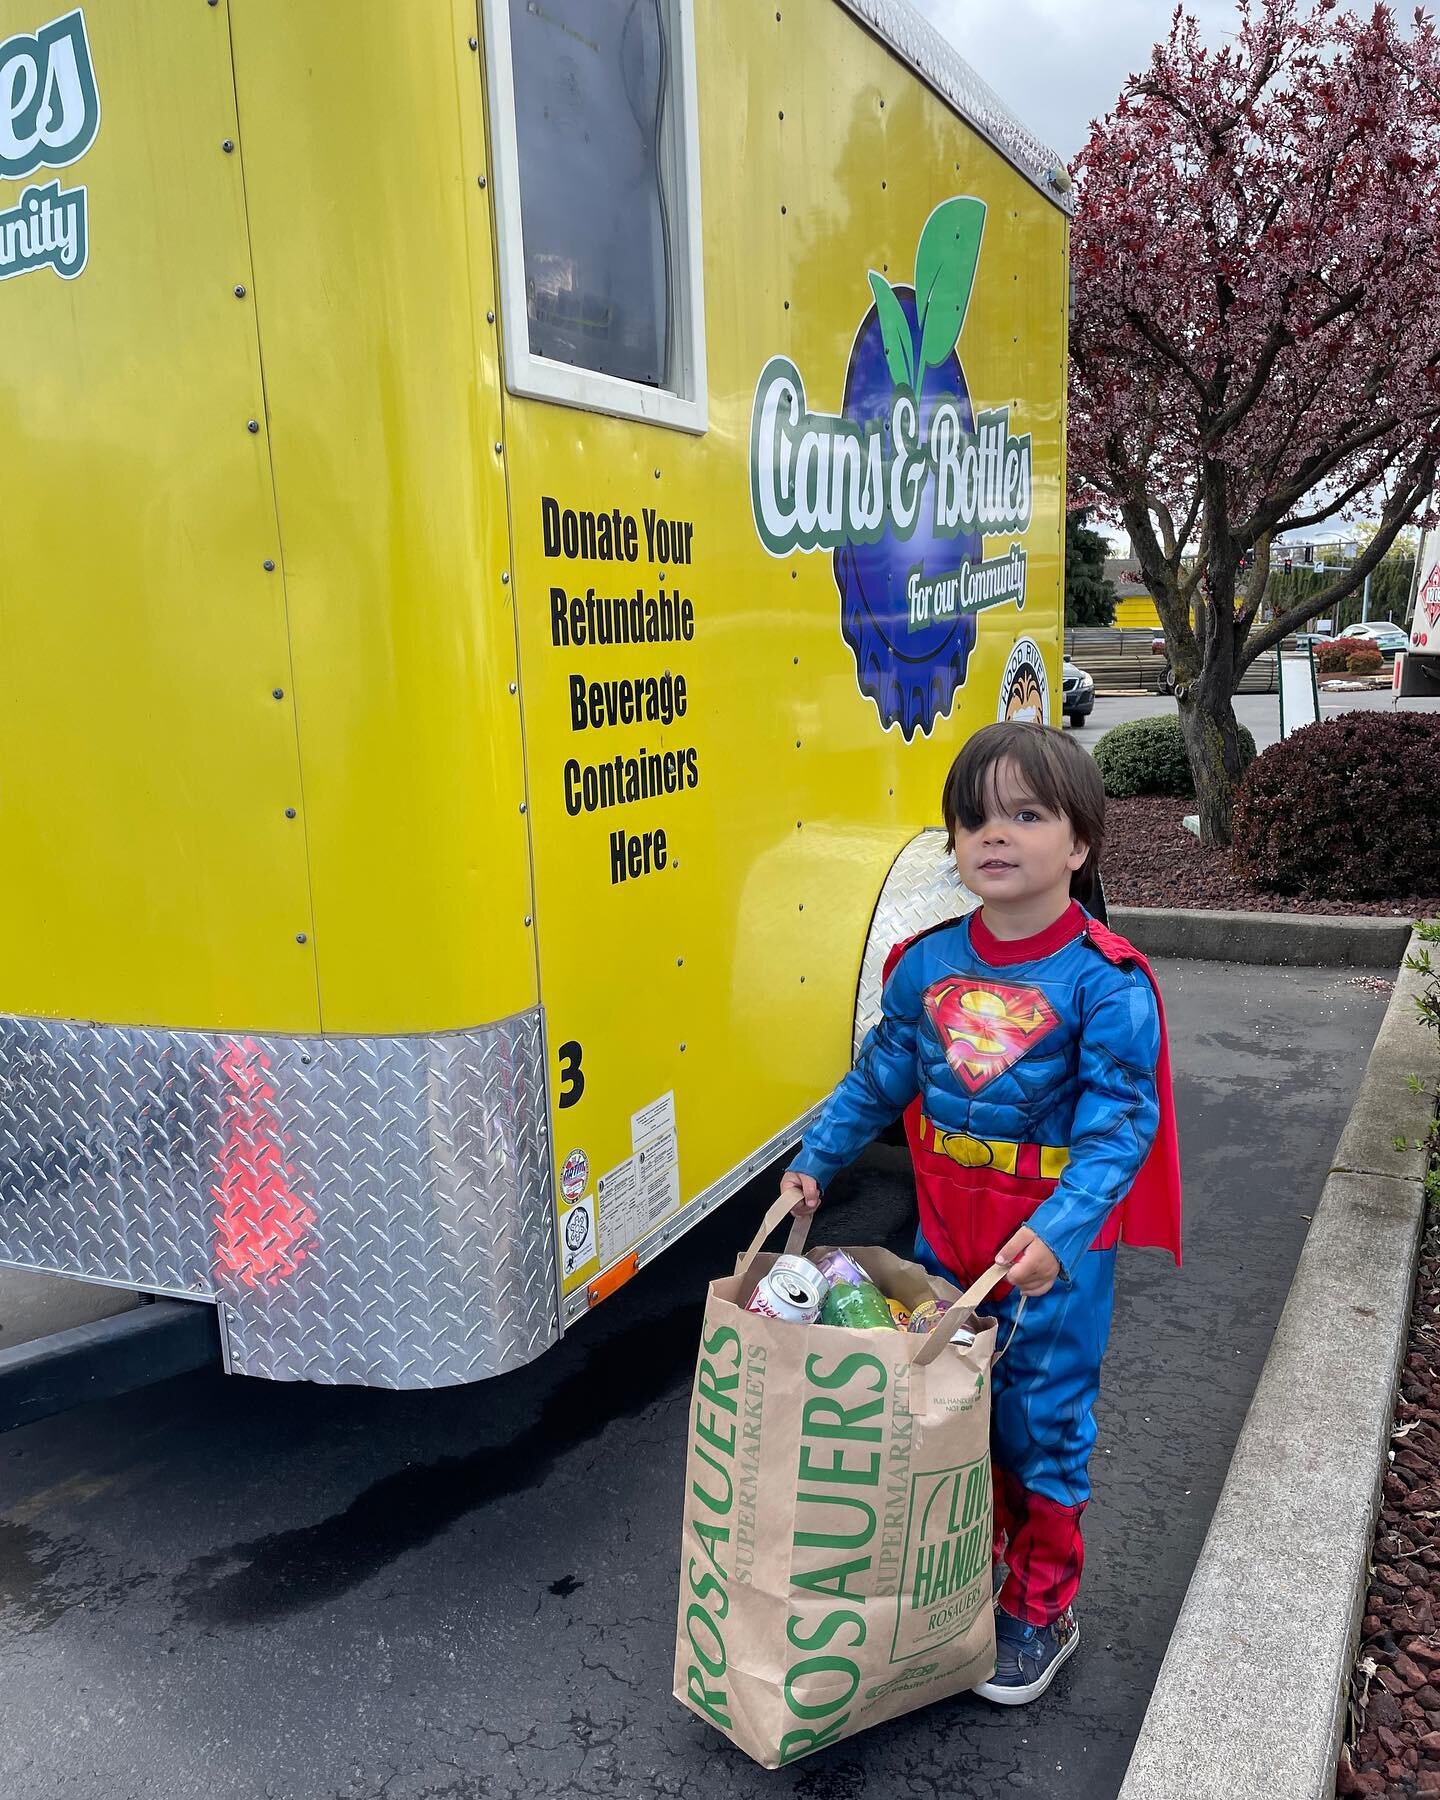 Superman himself visited the trailer today to drop off some cans for our Ukraine fundraiser! The drive ends tomorrow so you have one more day to bring your bottles and cans. The Hood River Lions will match all donations up to $2500 and all proceeds g